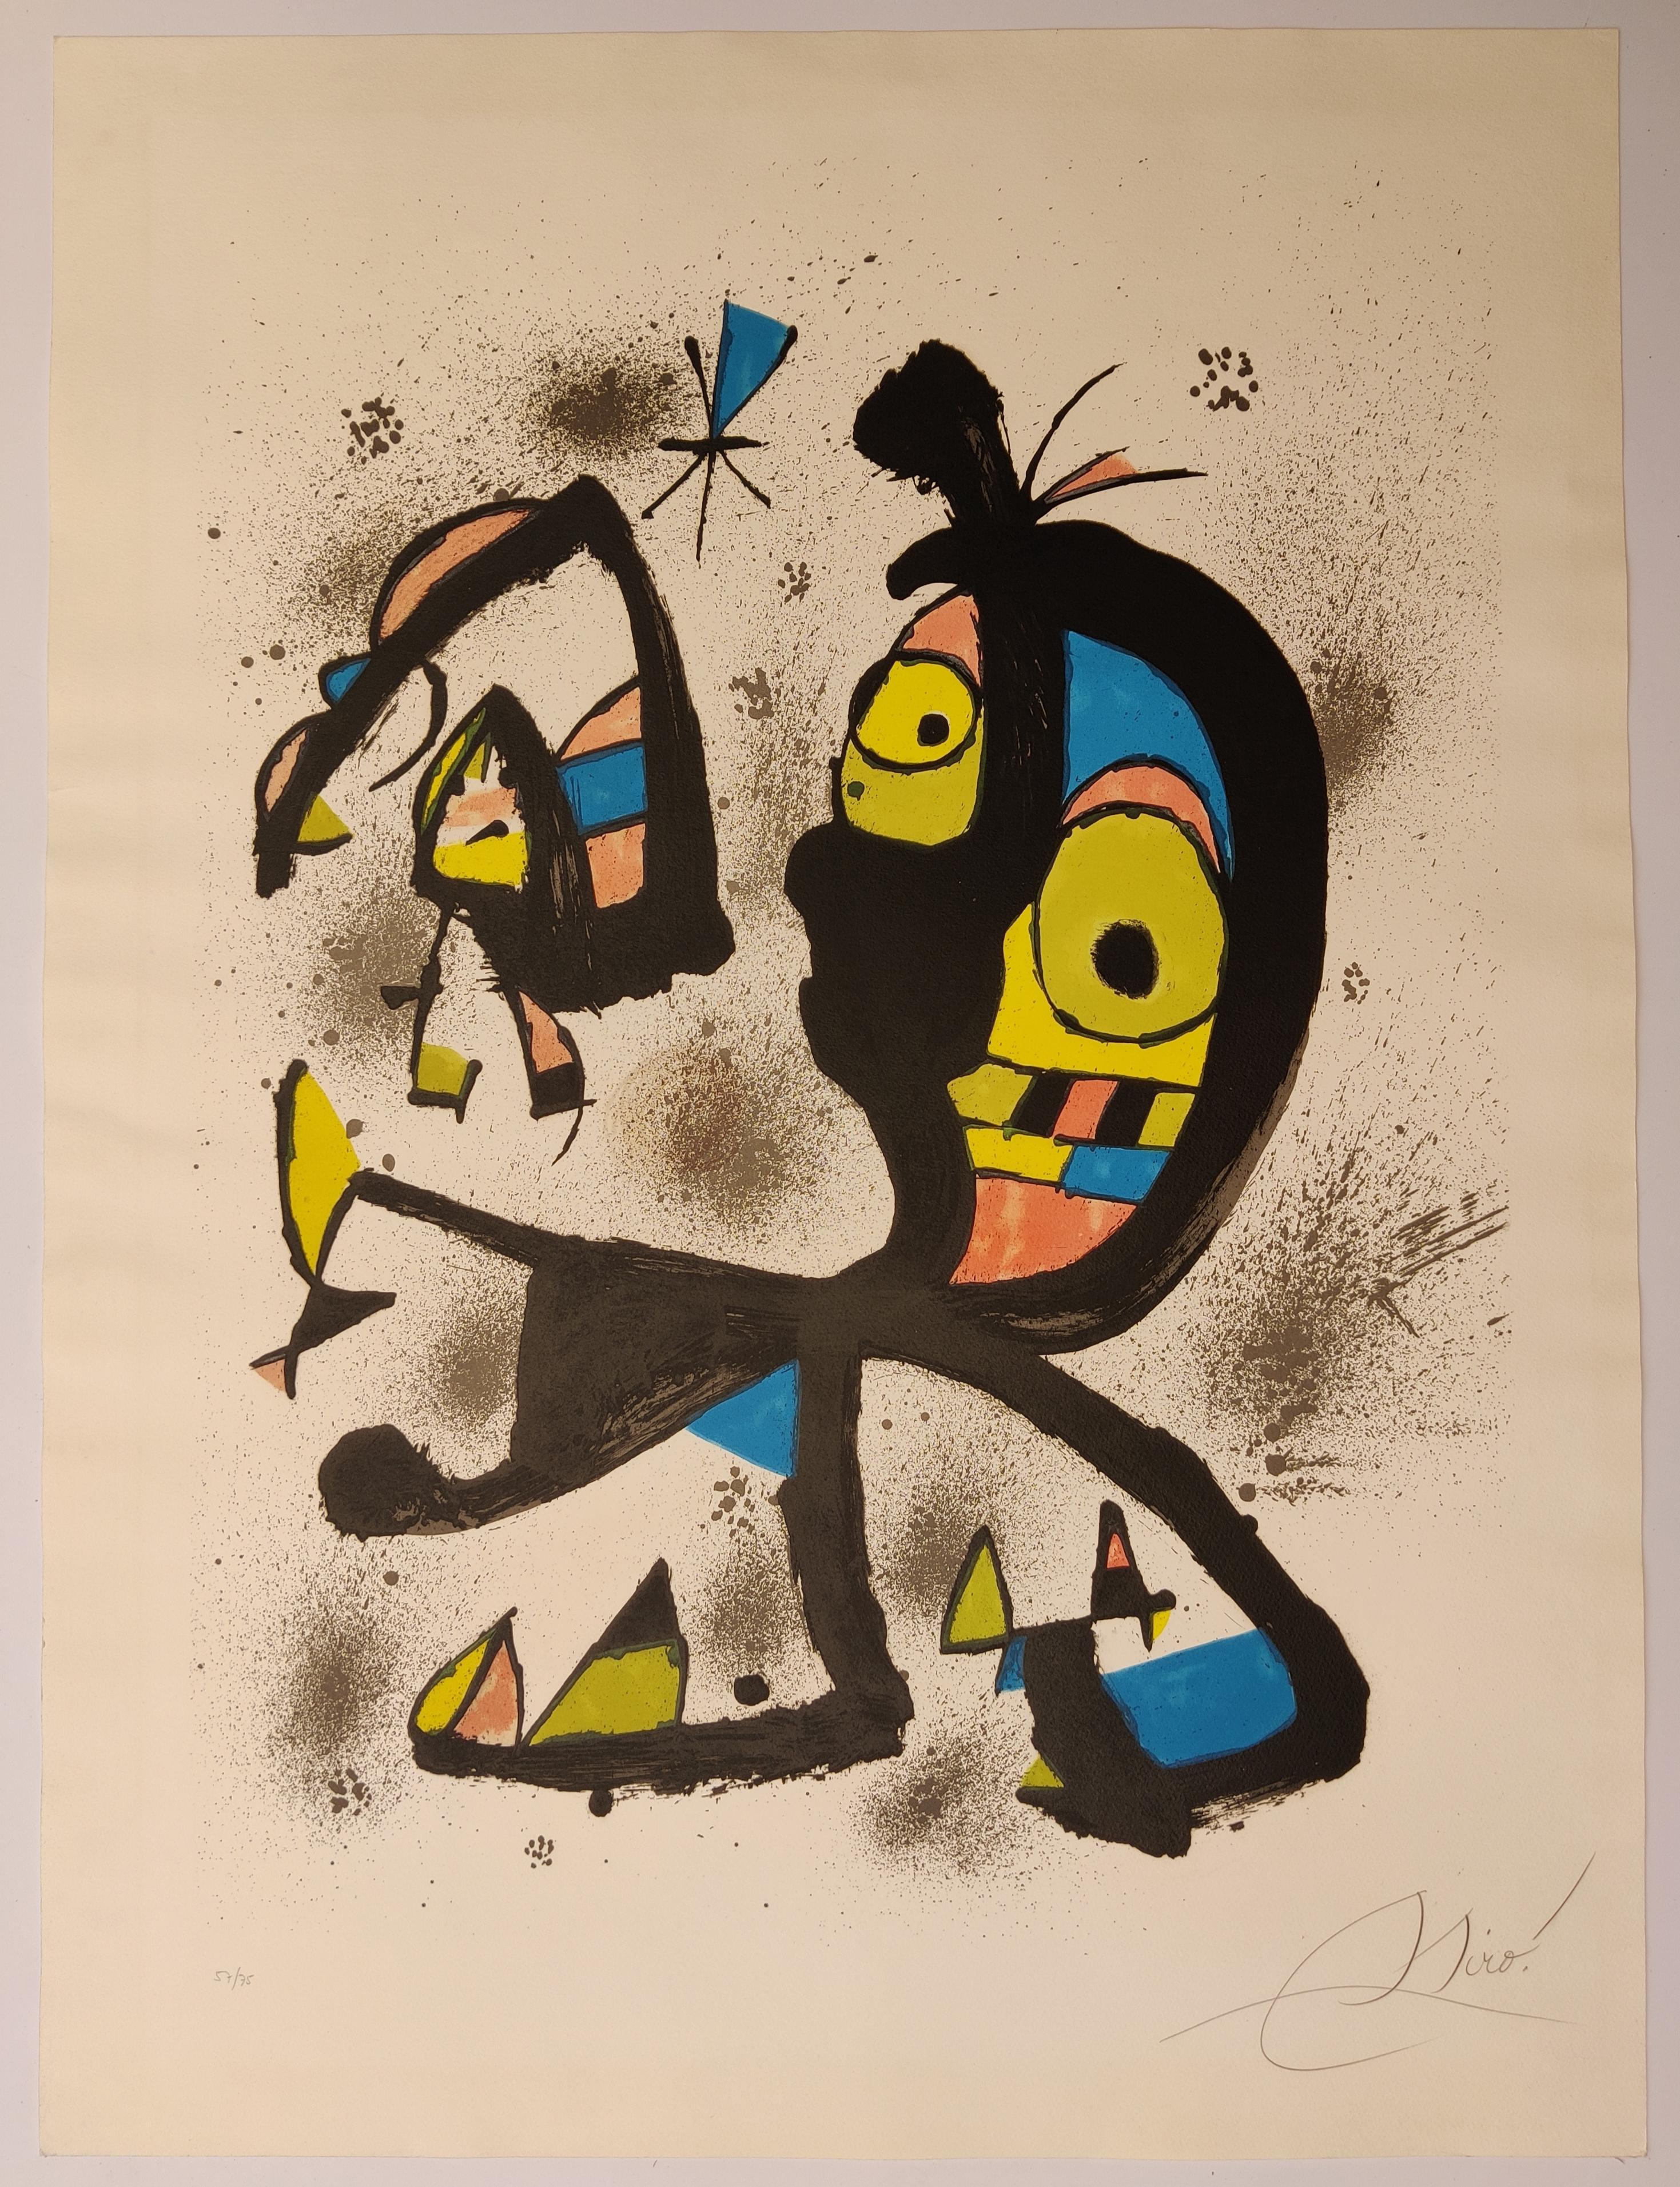 Joan Miró
Obra Gràfica (Graphic Work),  1980
Lithograph in colors, on Arches paper, with full margins.
Image size 78 x 58 cm
Sheet size 94 x 70 cm
Signed and numbered 57/75 in pencil (there were also 20 hors commerce in Roman numerals)
Published by